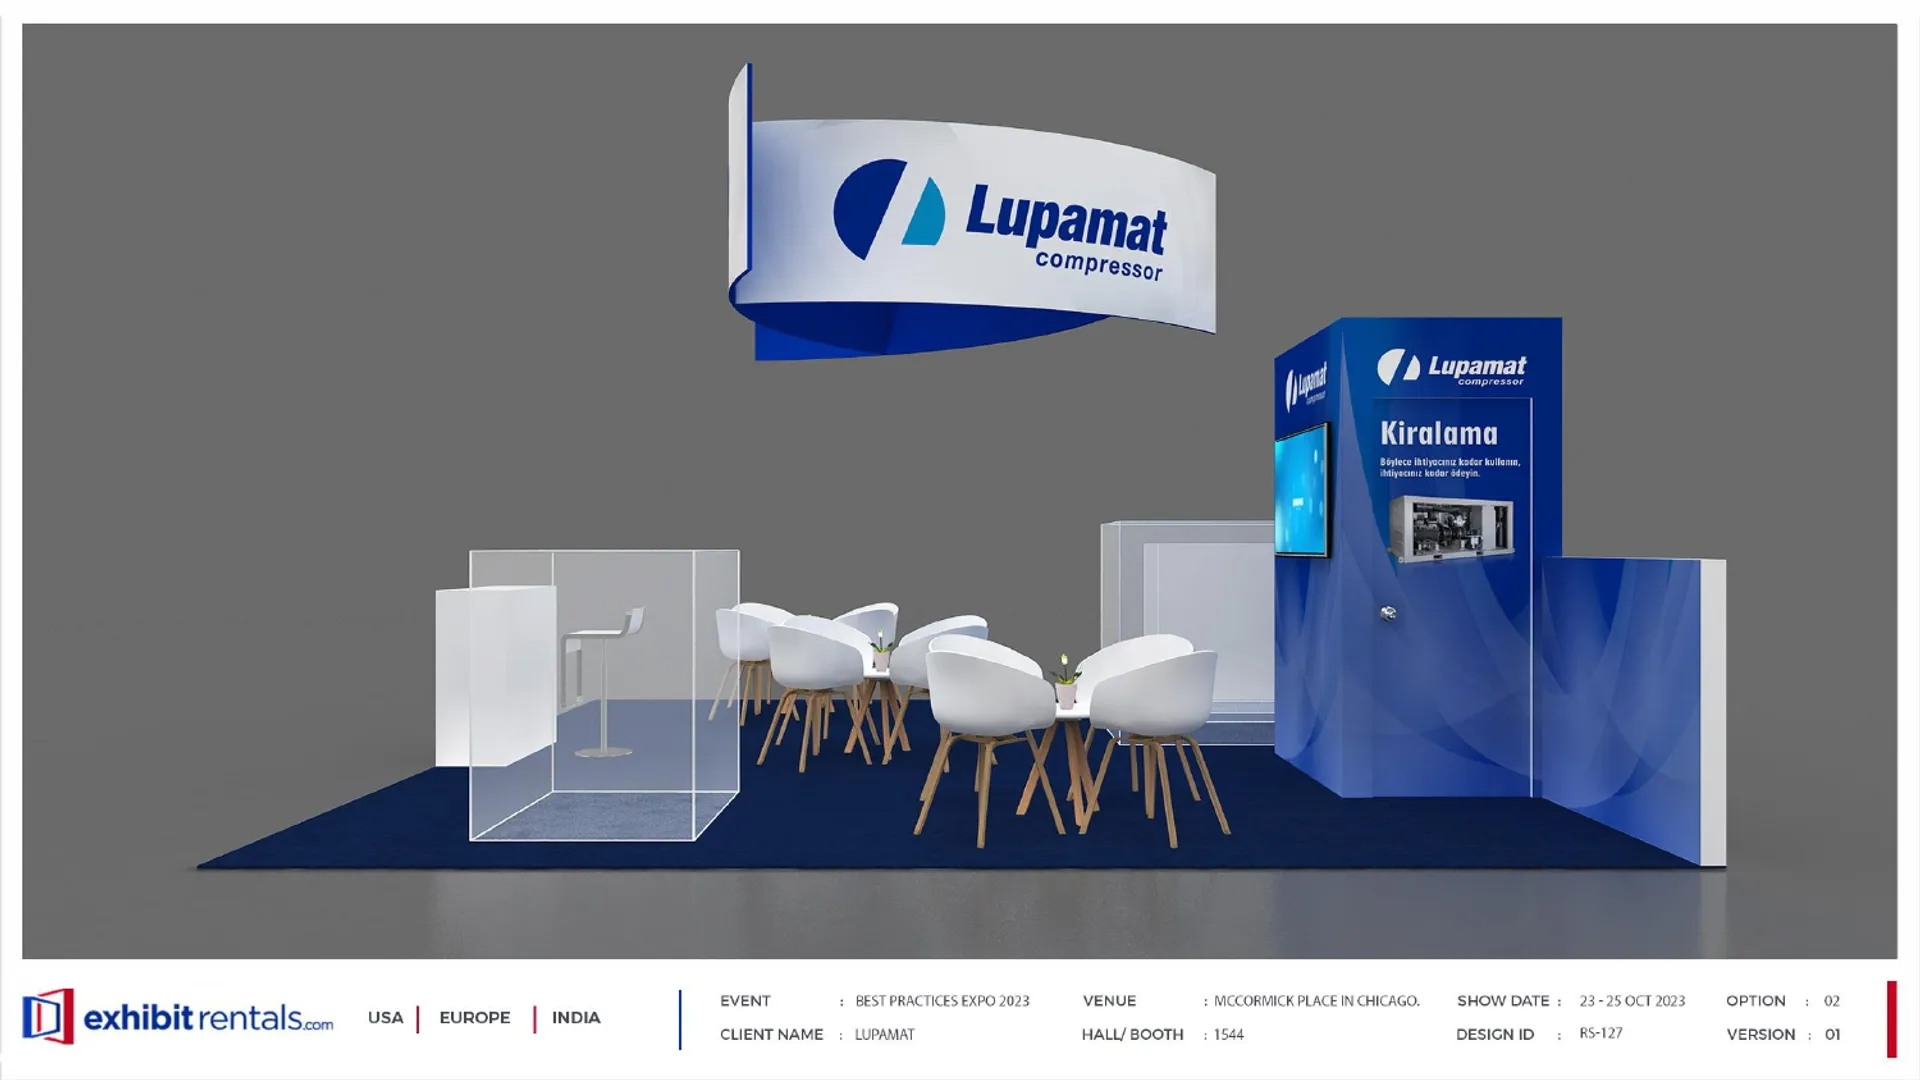 booth-design-projects/Exhibit-Rentals/2024-04-18-40x40-PENINSULA-Project-99/2.1_Lupamat_Best practices expo_ER design proposal-11_page-0001-u9mvlp.jpg